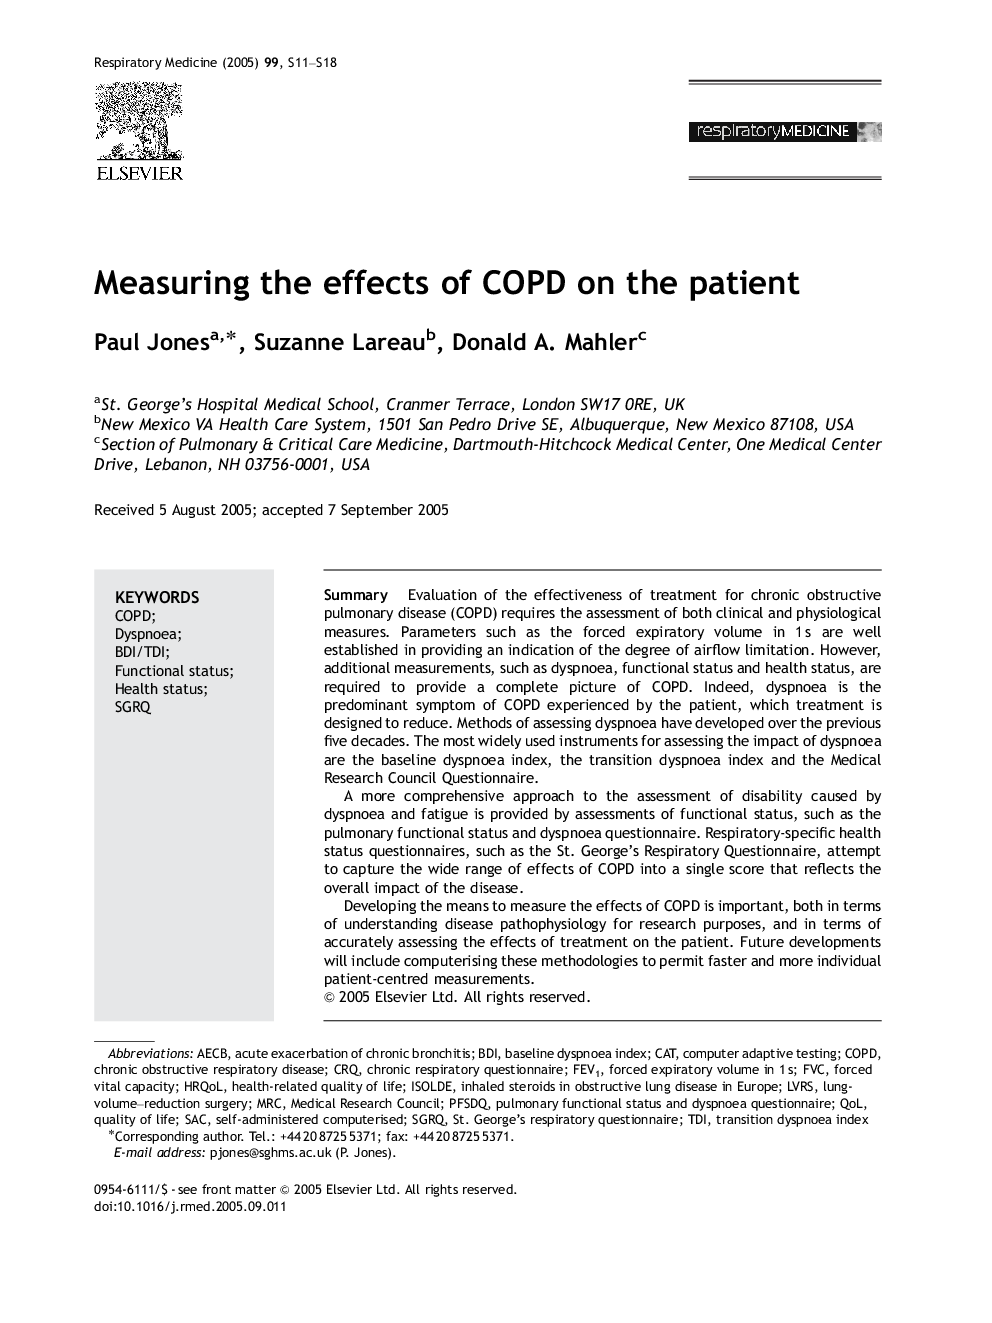 Measuring the effects of COPD on the patient